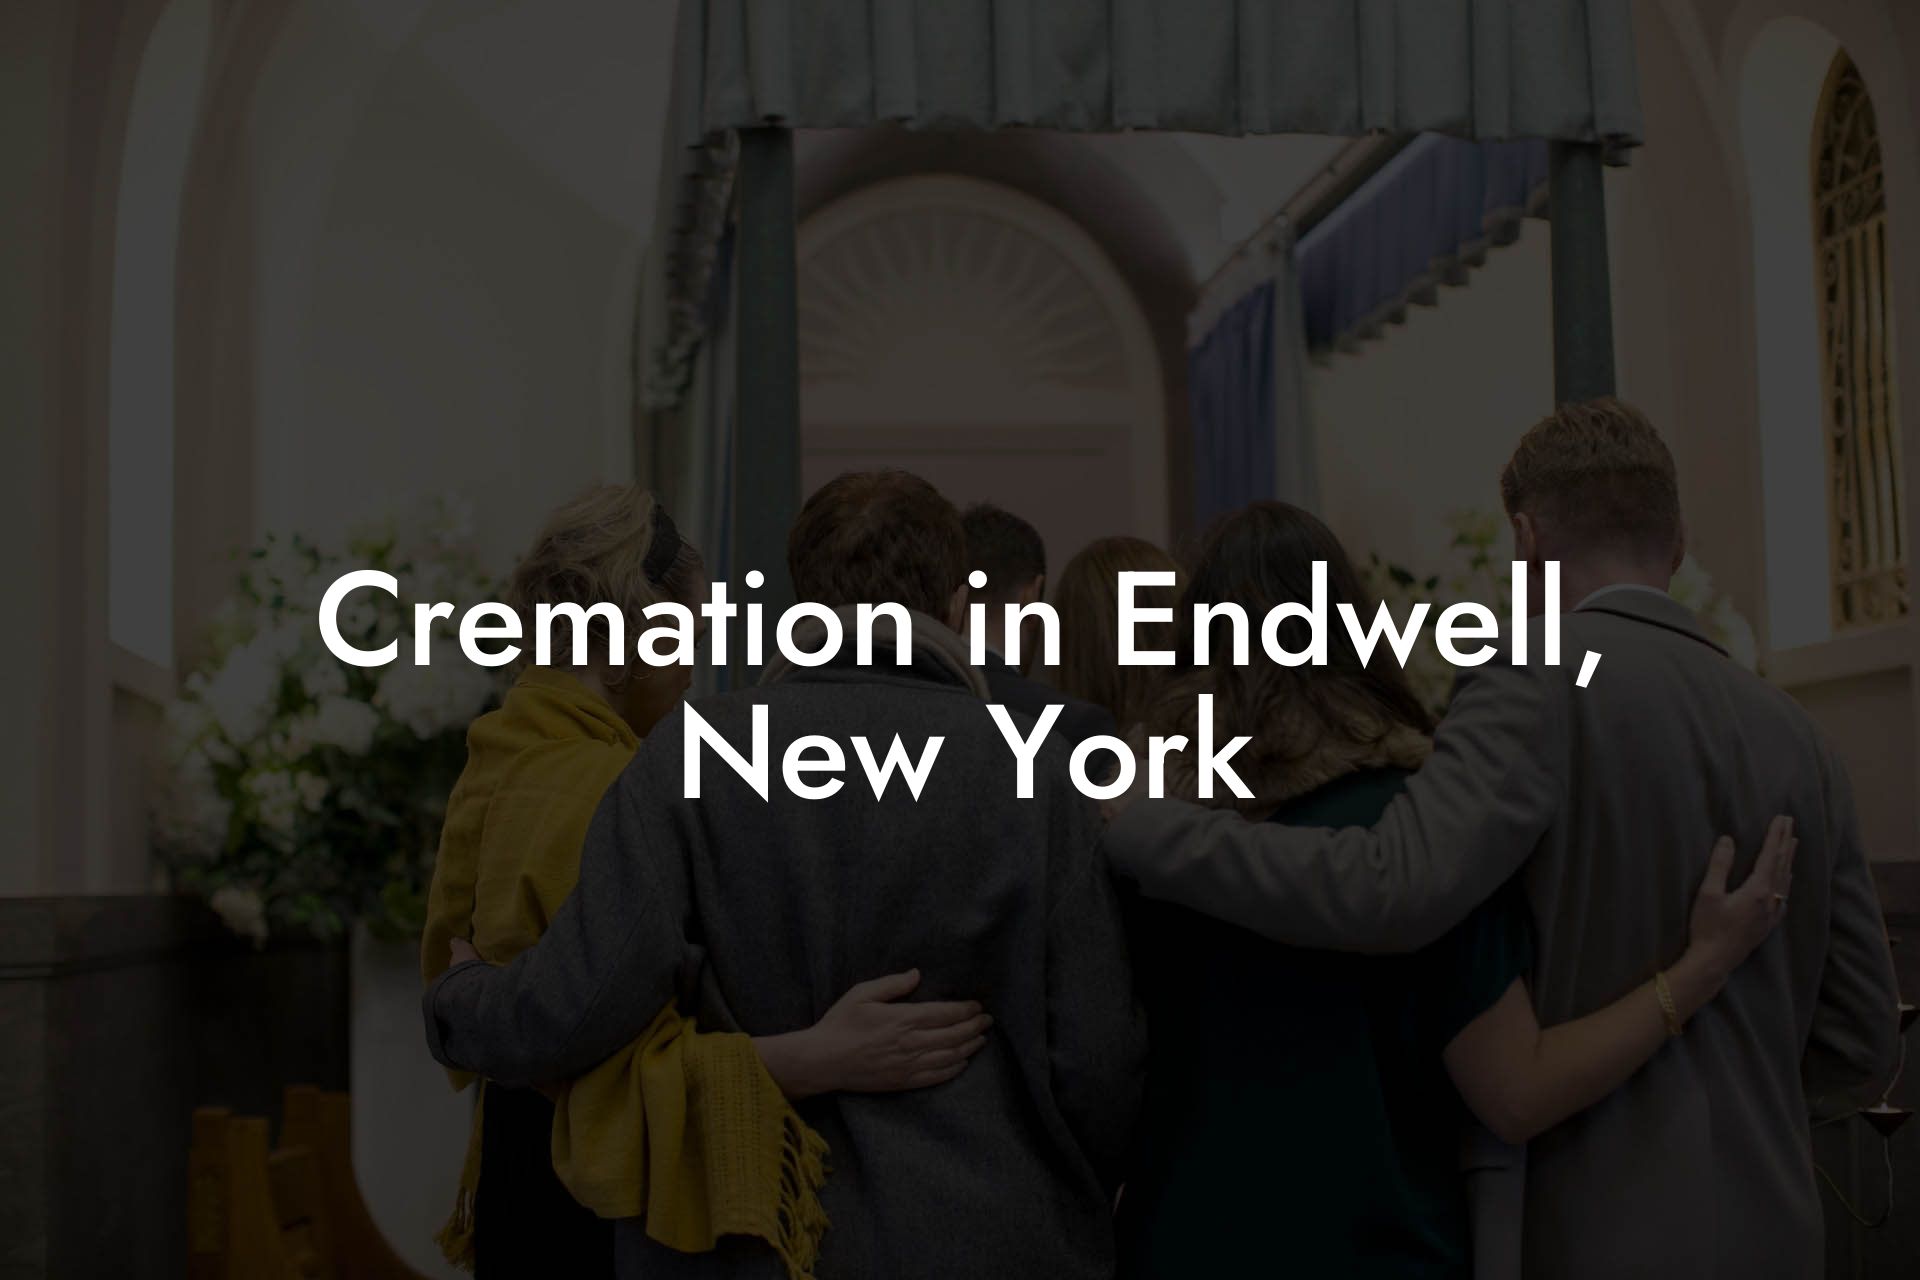 Cremation in Endwell, New York